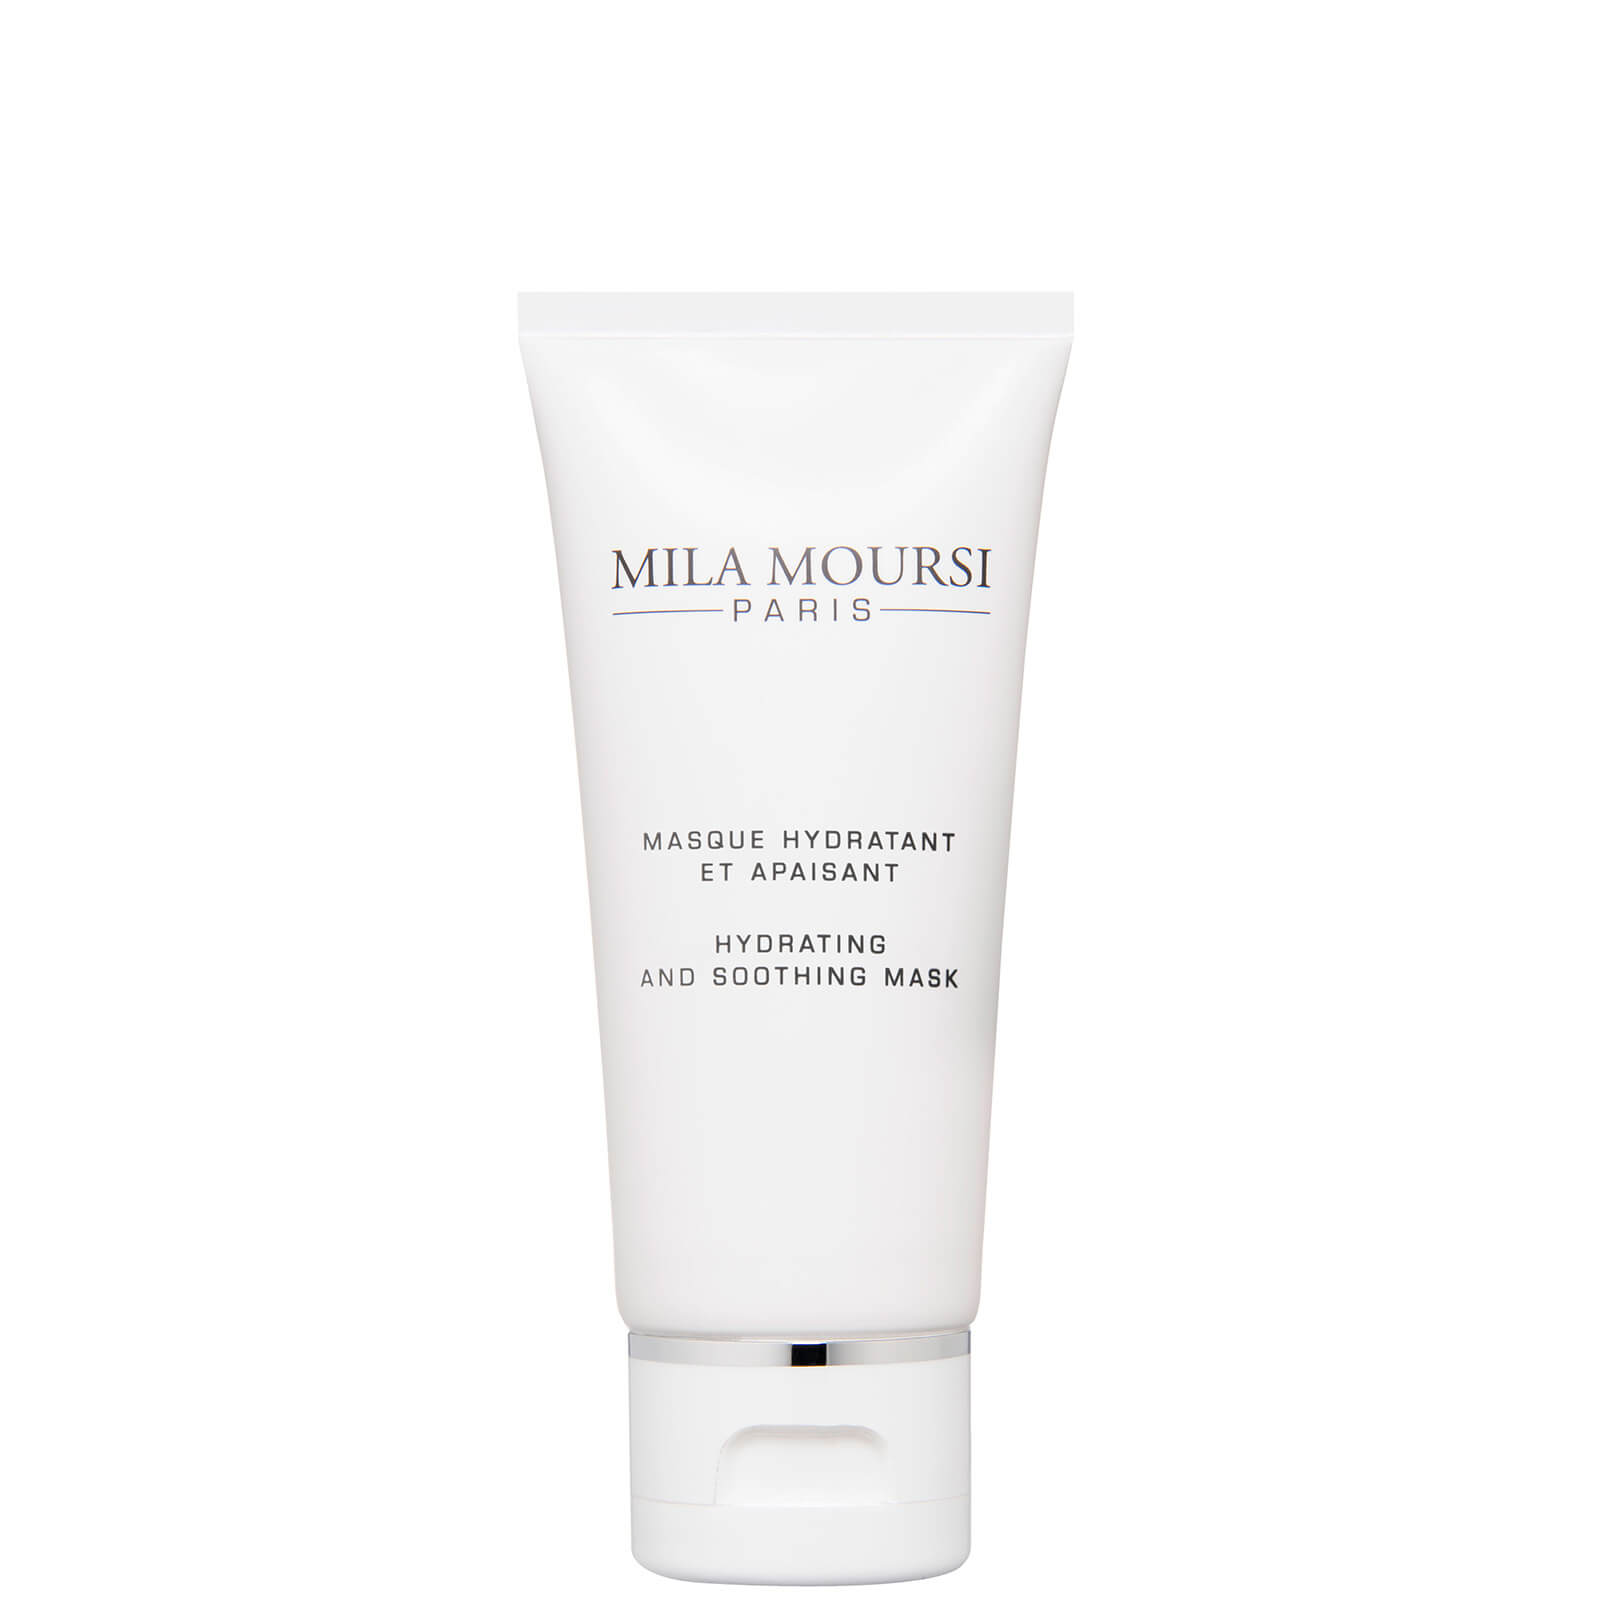 Mila Moursi Hydrating and Soothing Mask 50ml